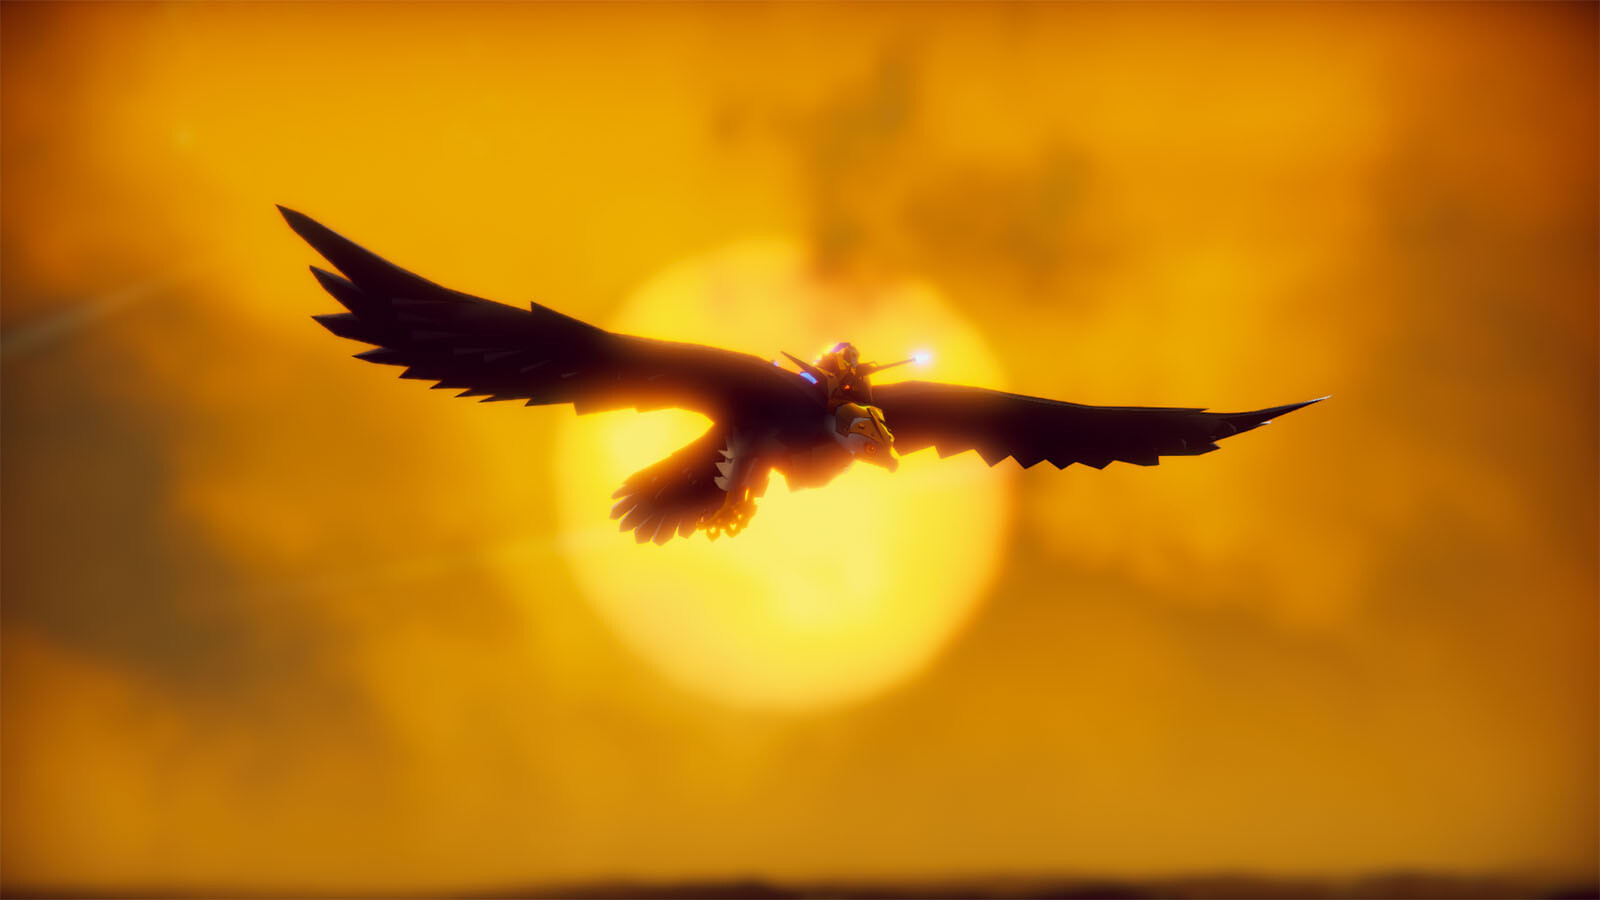 The Falconeer: Warrior Edition (Switch) review- Free Bird